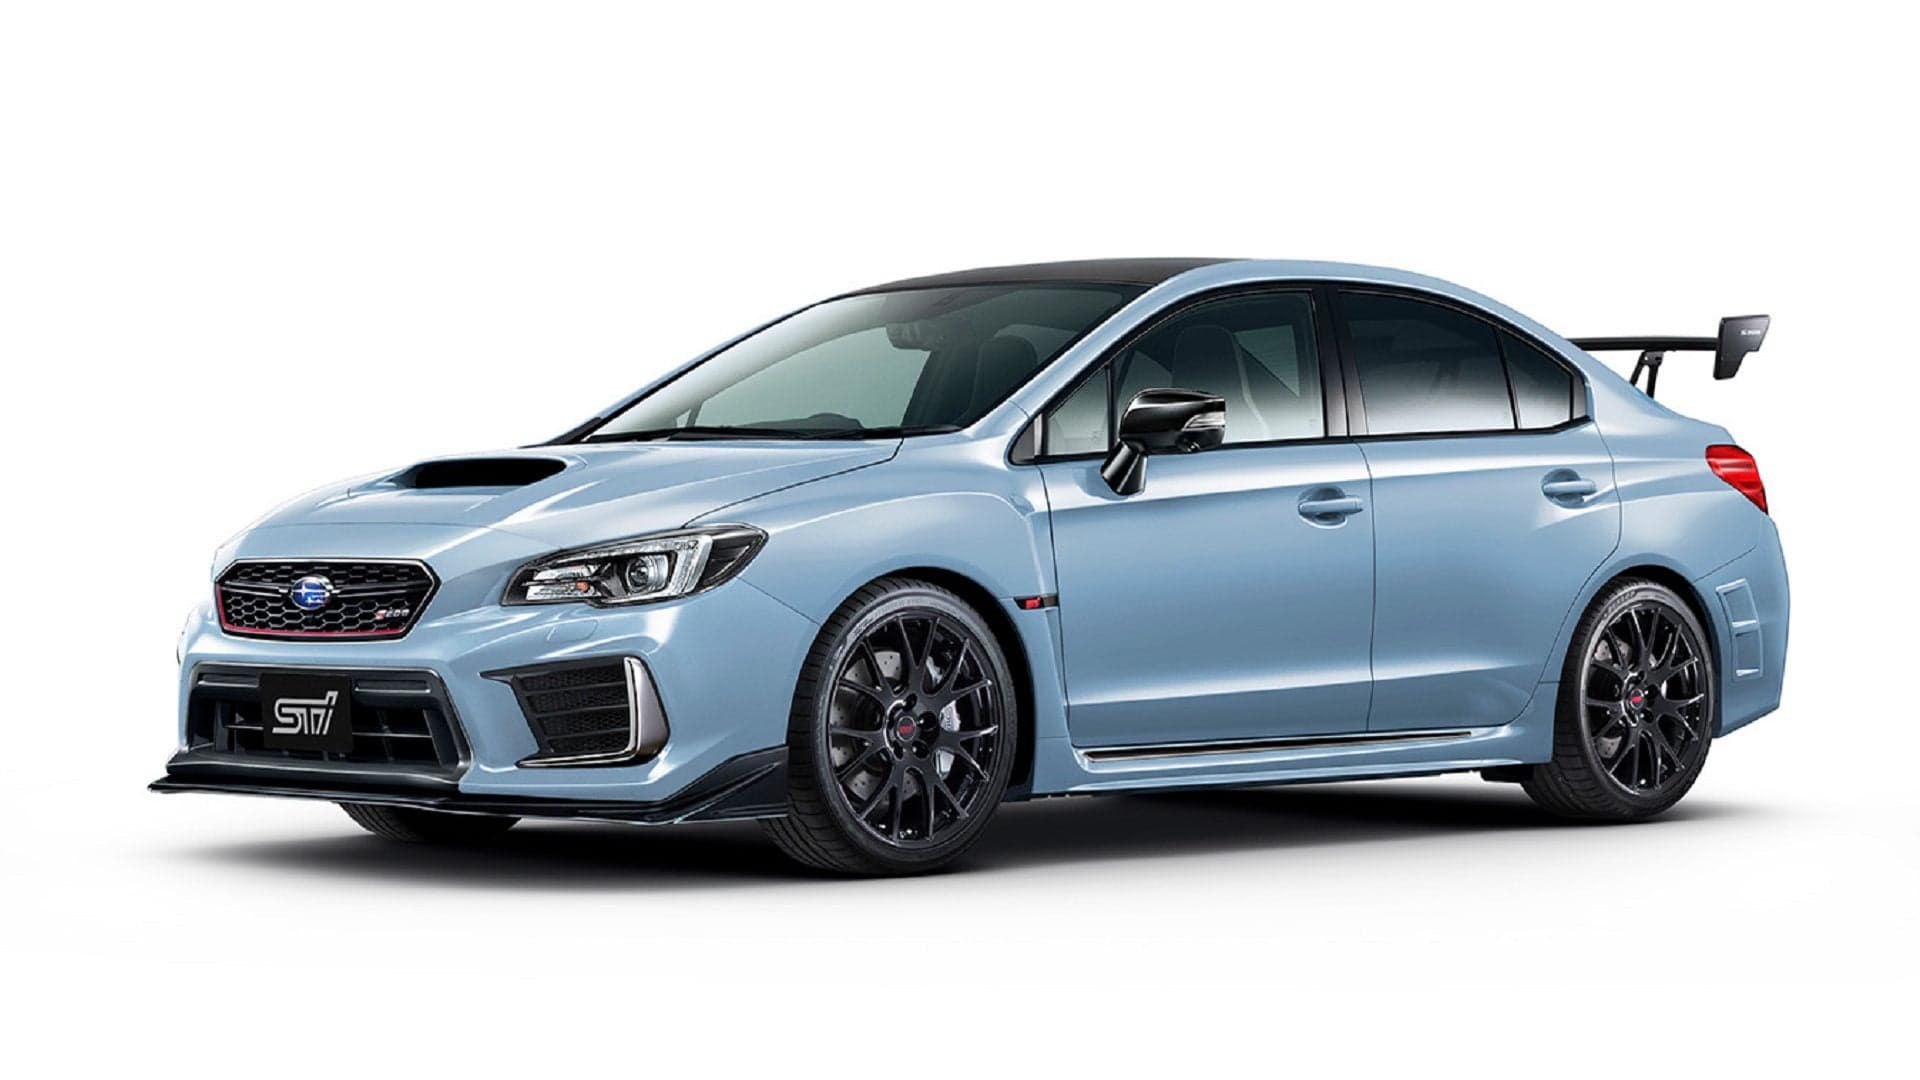 The Subaru WRX STI S208 is a Japan-Only, Carbon-Roofed Special Edition